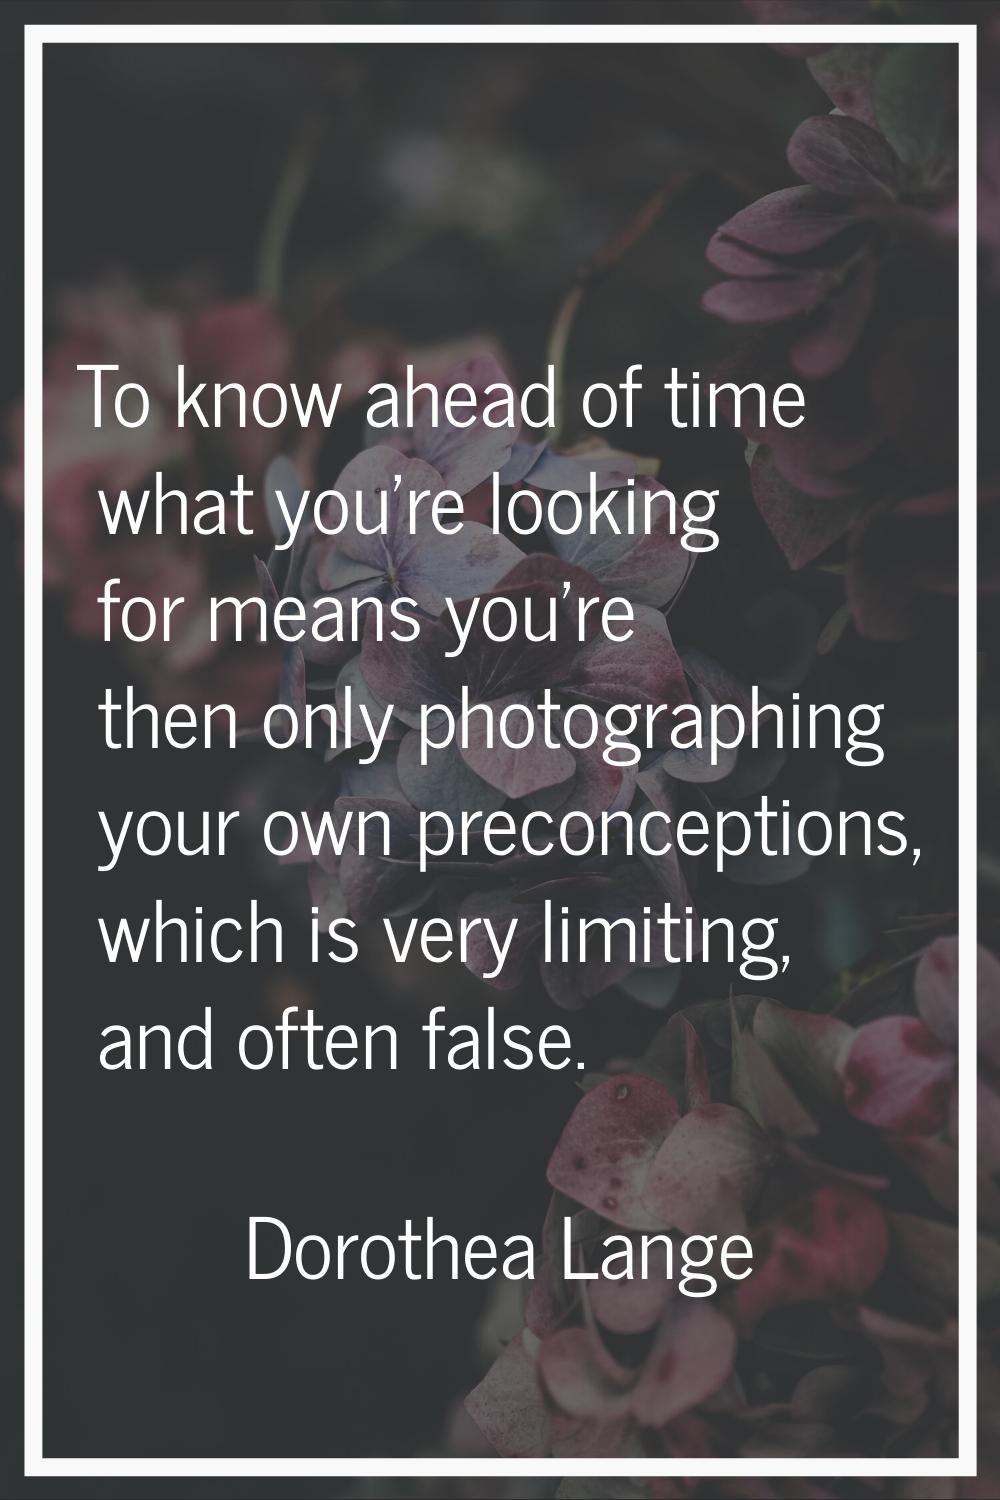 To know ahead of time what you're looking for means you're then only photographing your own preconc